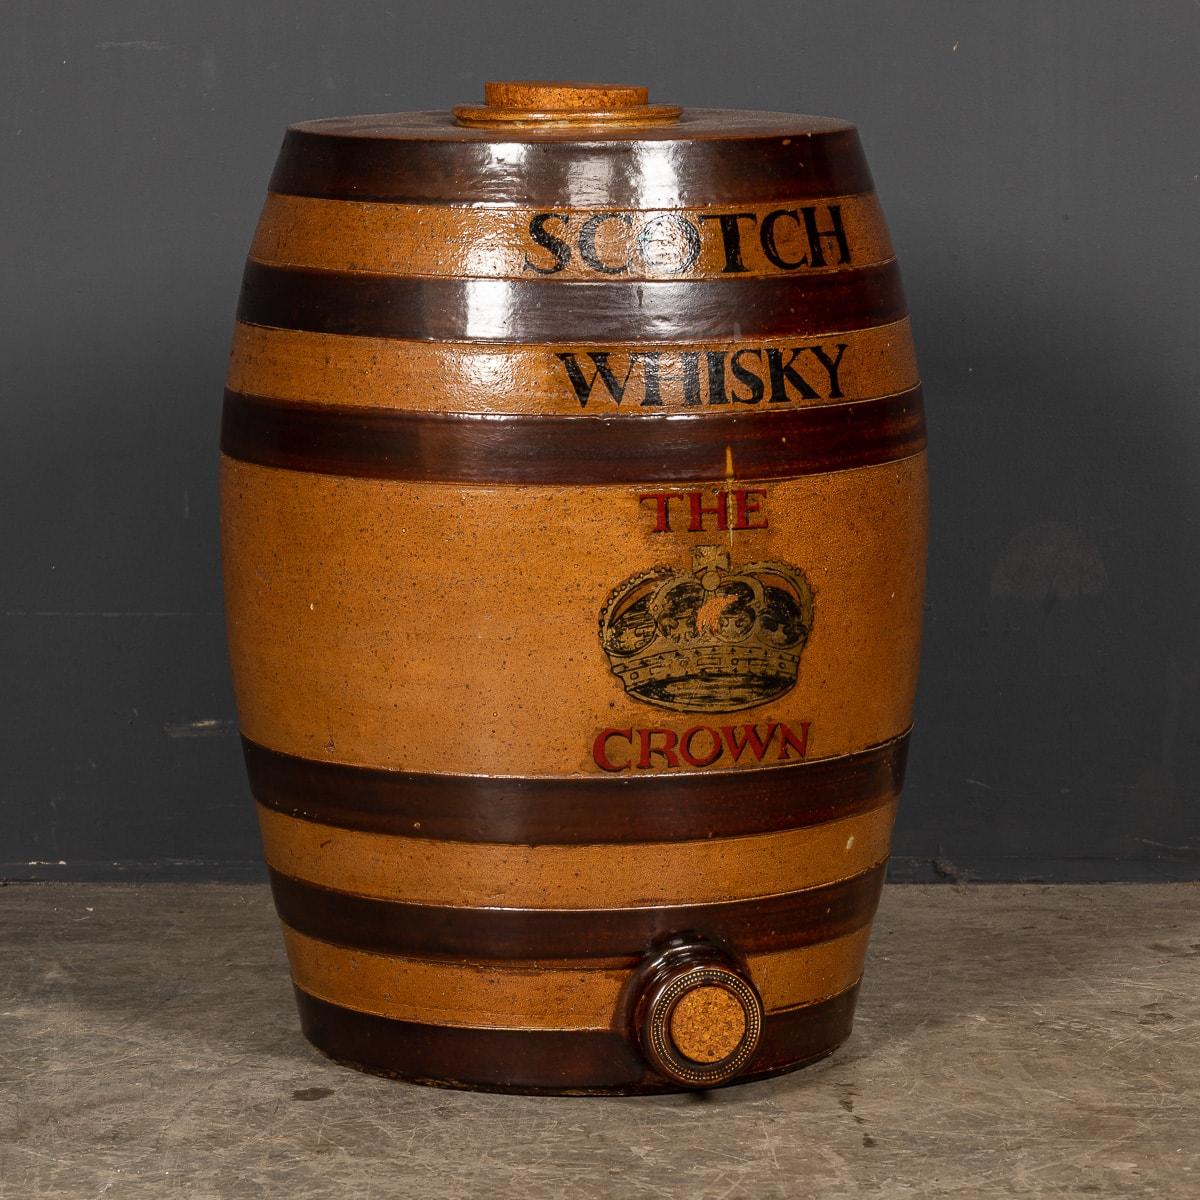 Antique 20th Century Victorian whisky barrel. An amazing example of a stoneware whisky barrel used to store and measure drams of whisky from to sell in a Victorian Inn called “The Crown”. 

CONDITION
In Good Condition - Wear as expected. Please